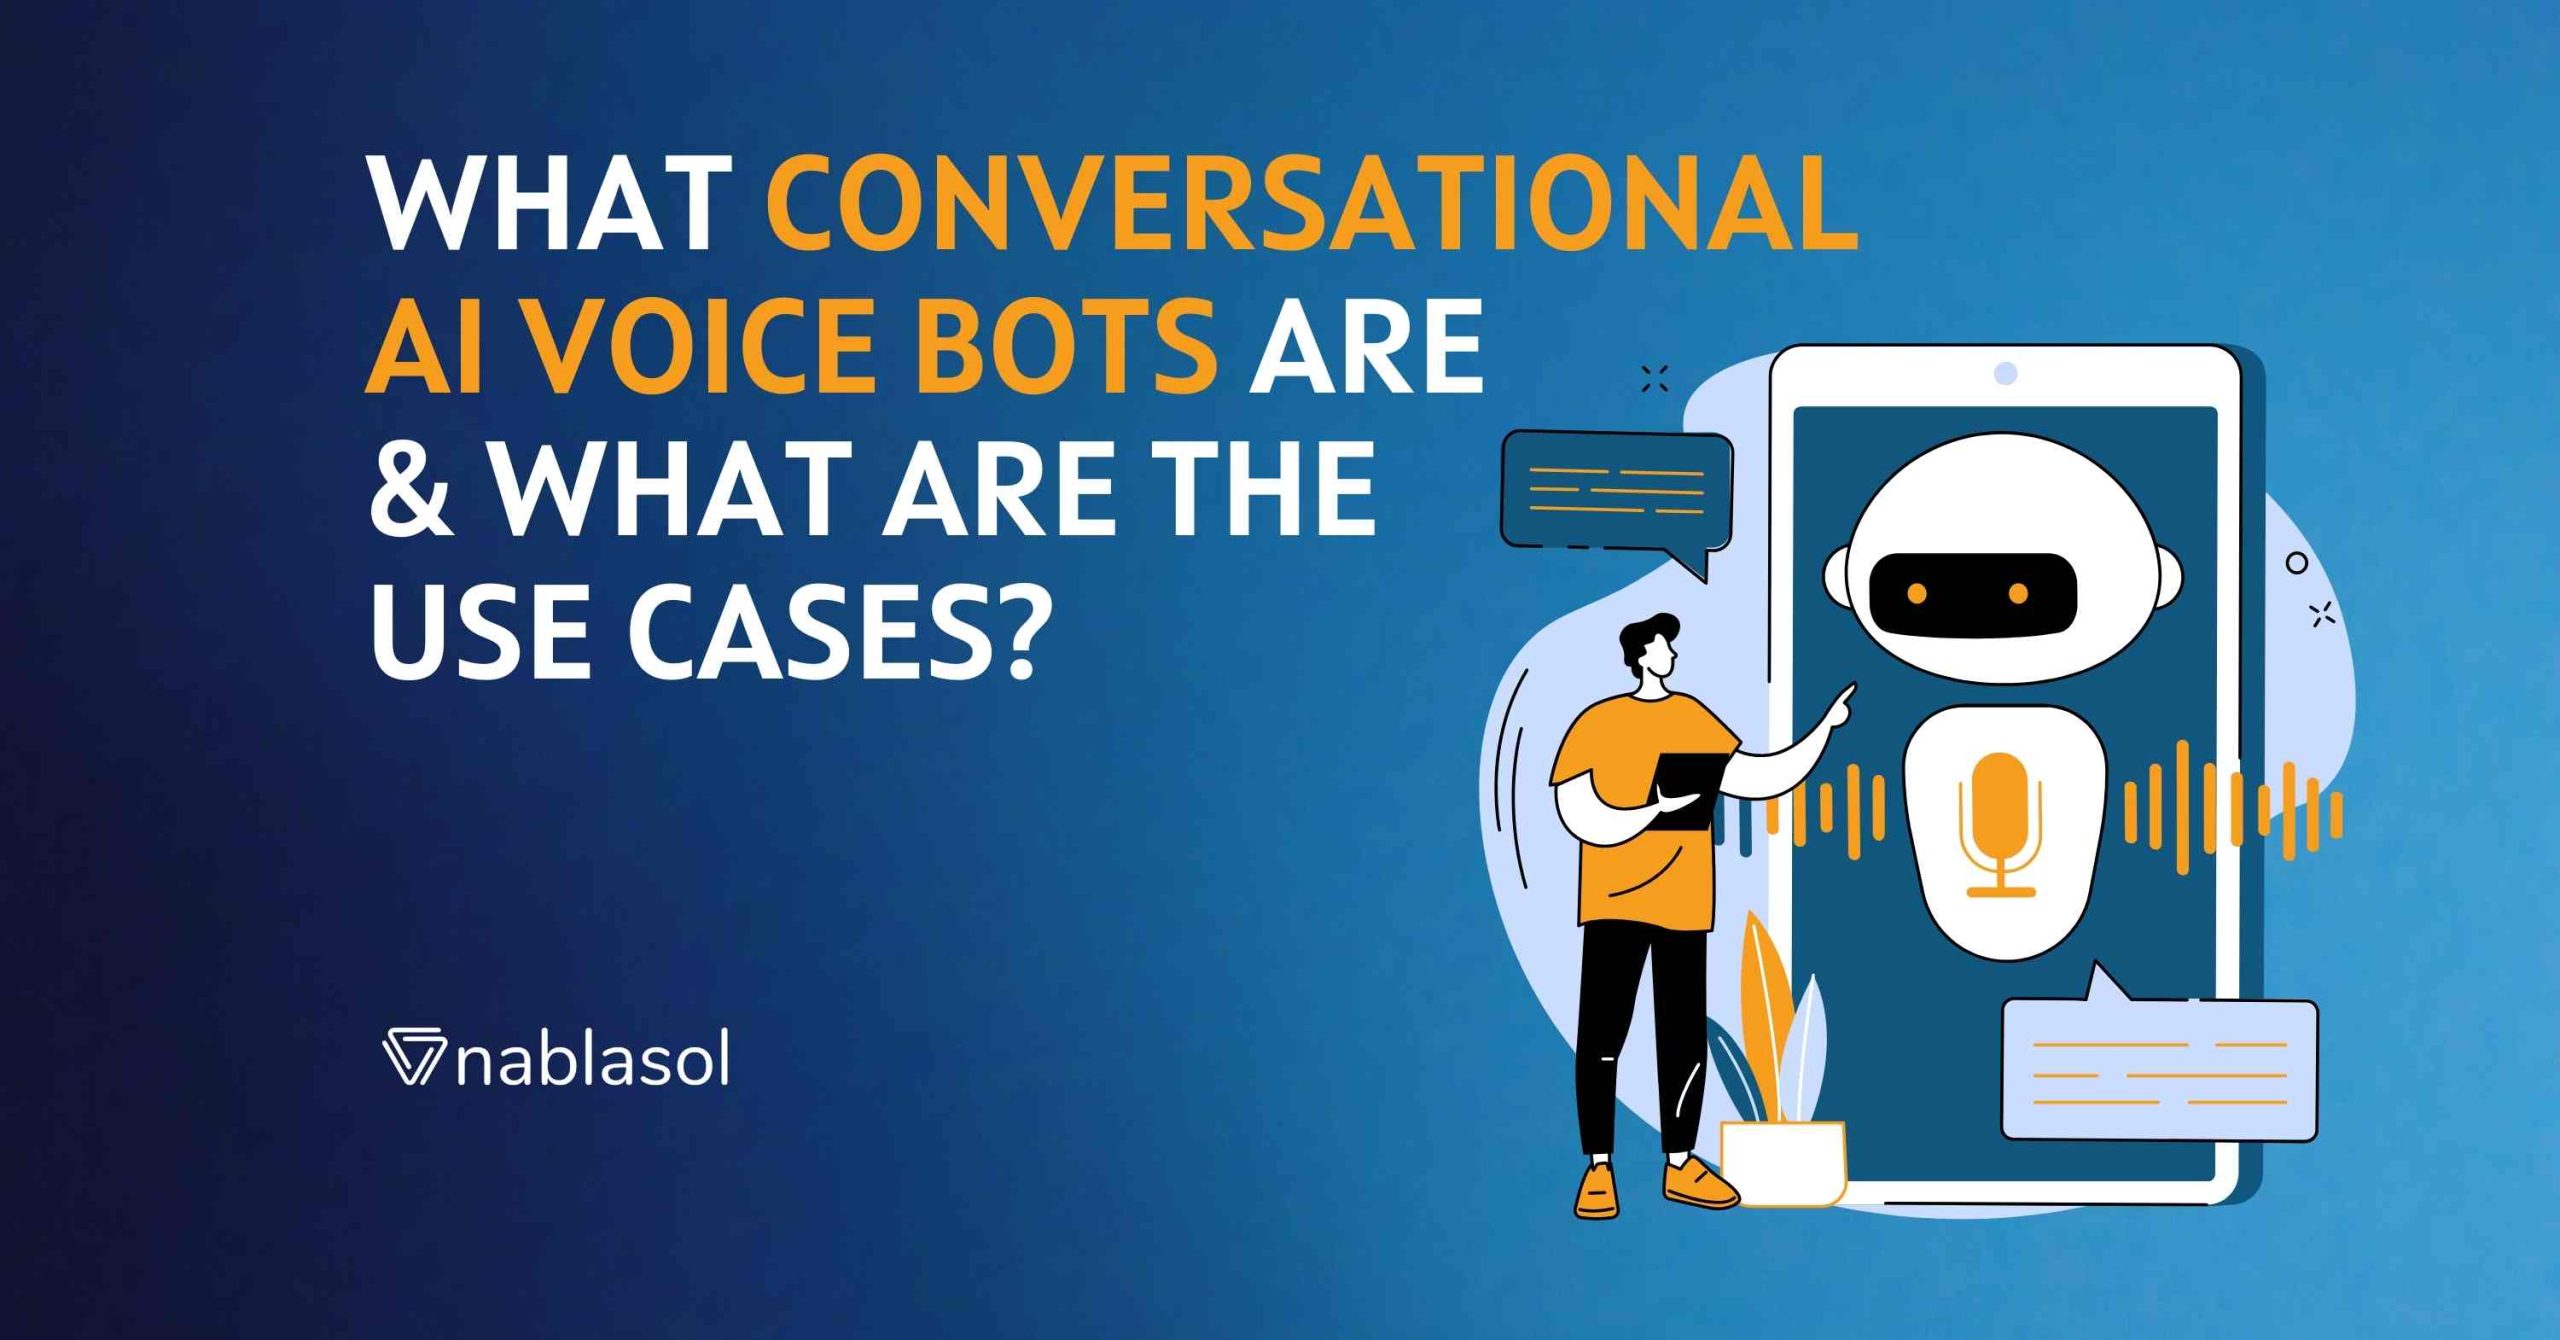 What Are Conversational AI Voice Bots & Their Use Cases?